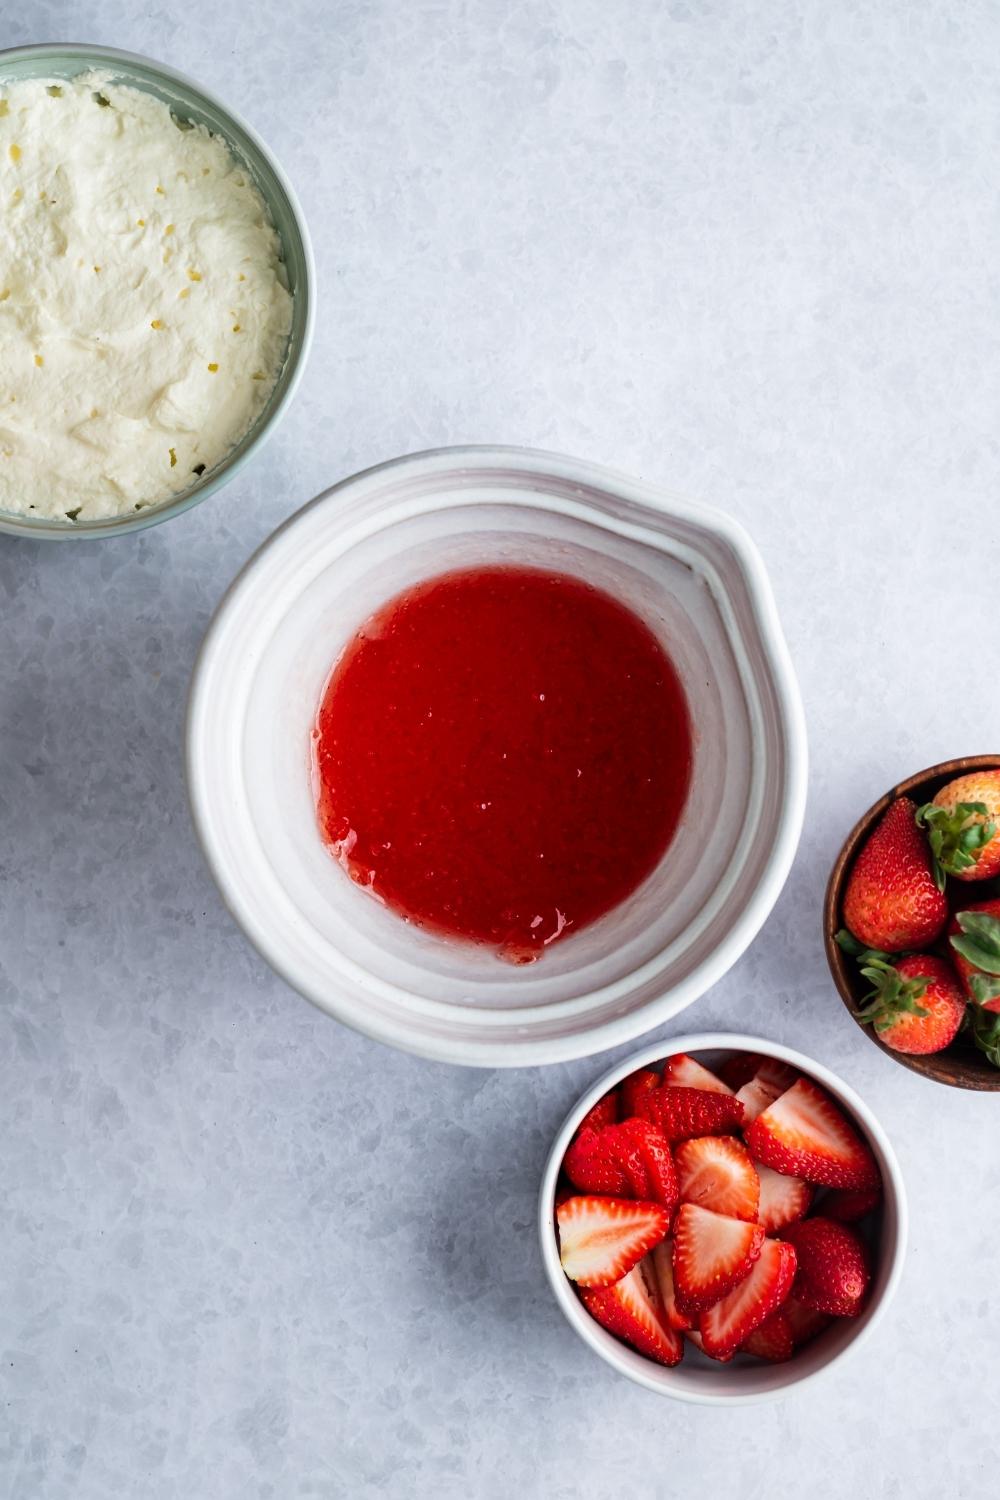 Strawberry sauce in a white bowl. A bowl of sliced strawberries and cool whip are on the sides of it.